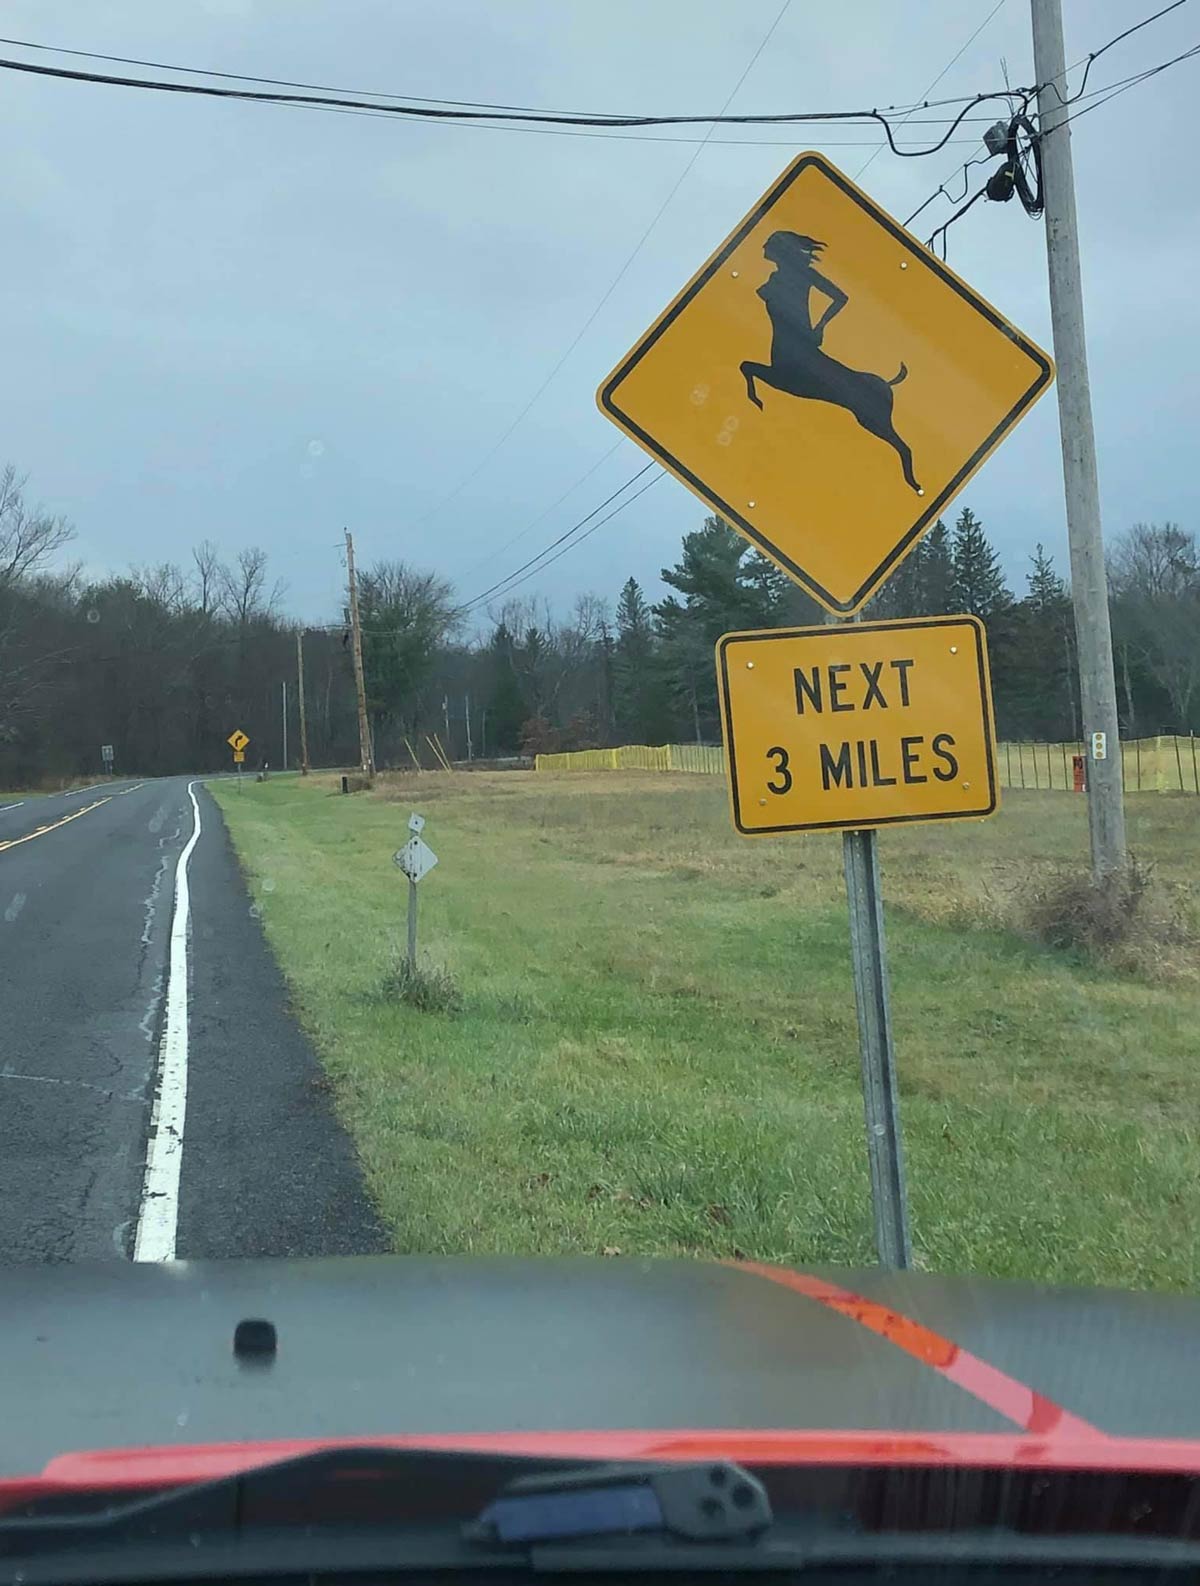 Someone altered a deer crossing sign in upstate NY